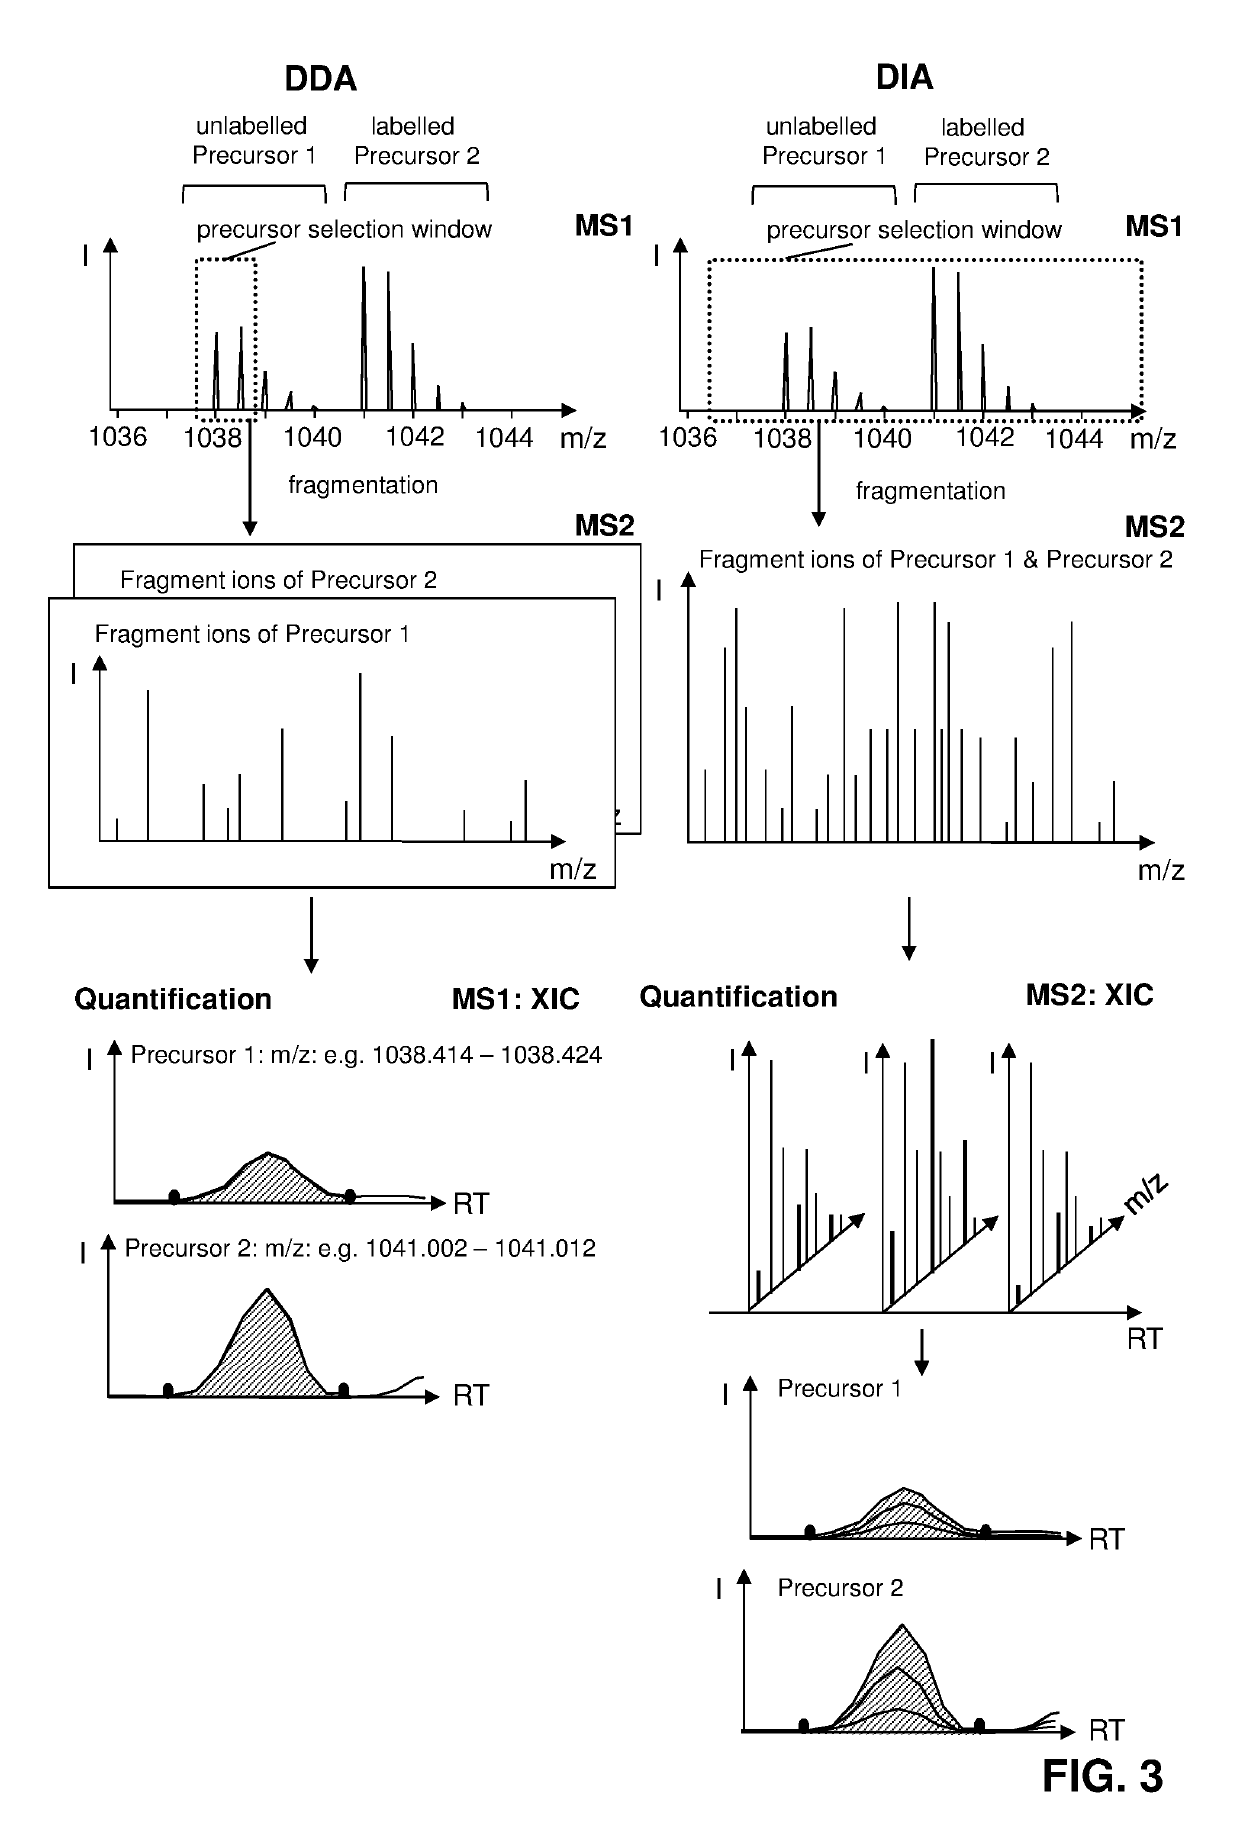 Labelled compounds and methods for mass spectrometry-based quantification